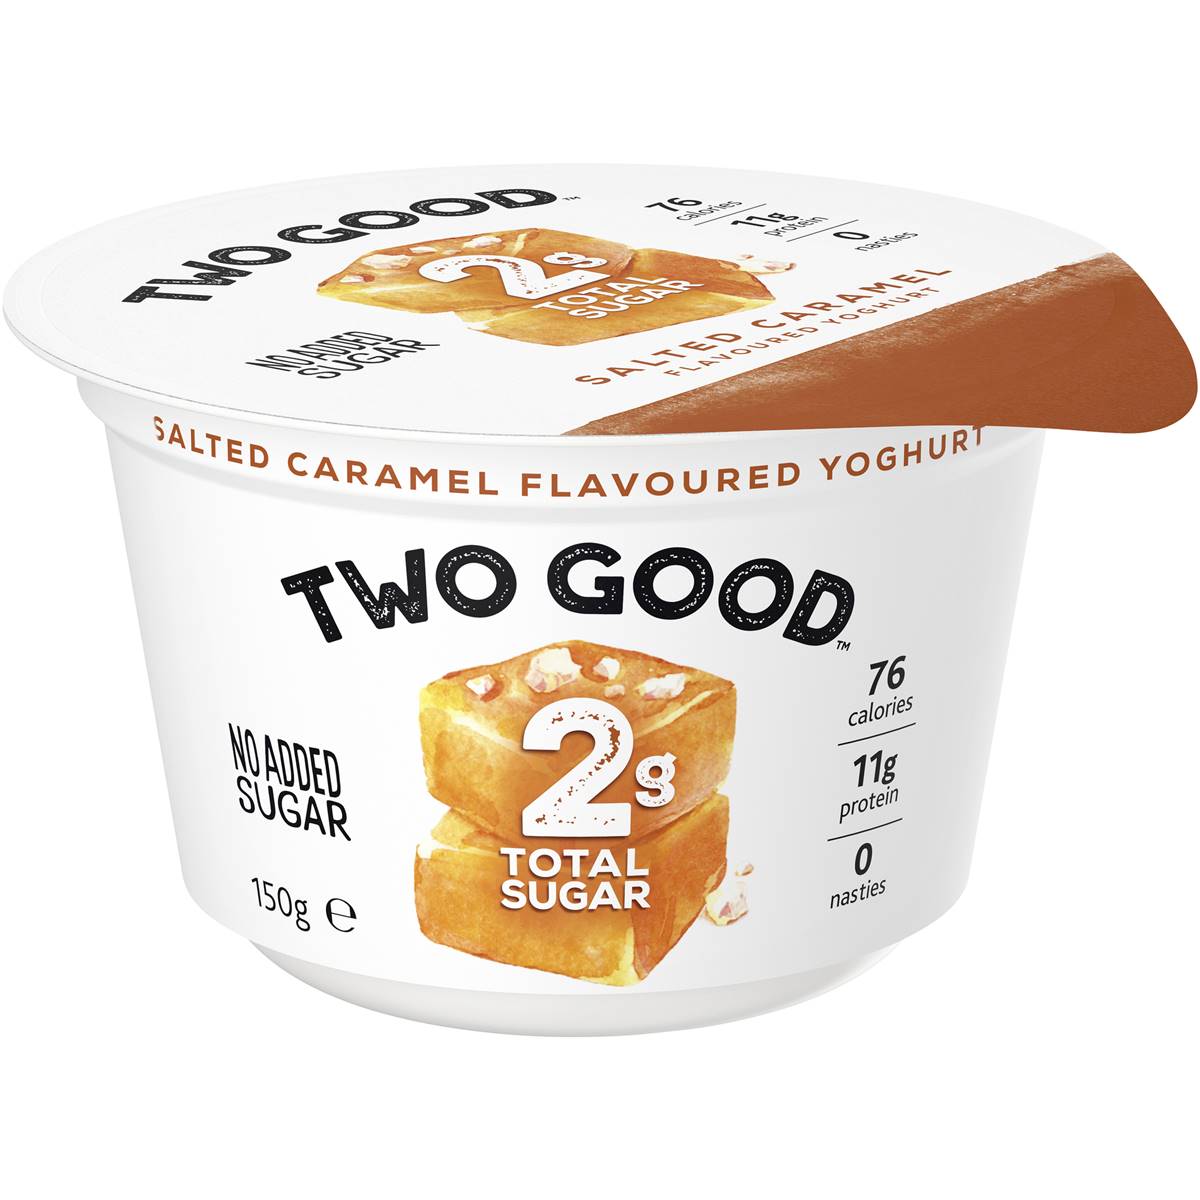 Calories in Two Good Salted Caramel Flavoured Yoghurt